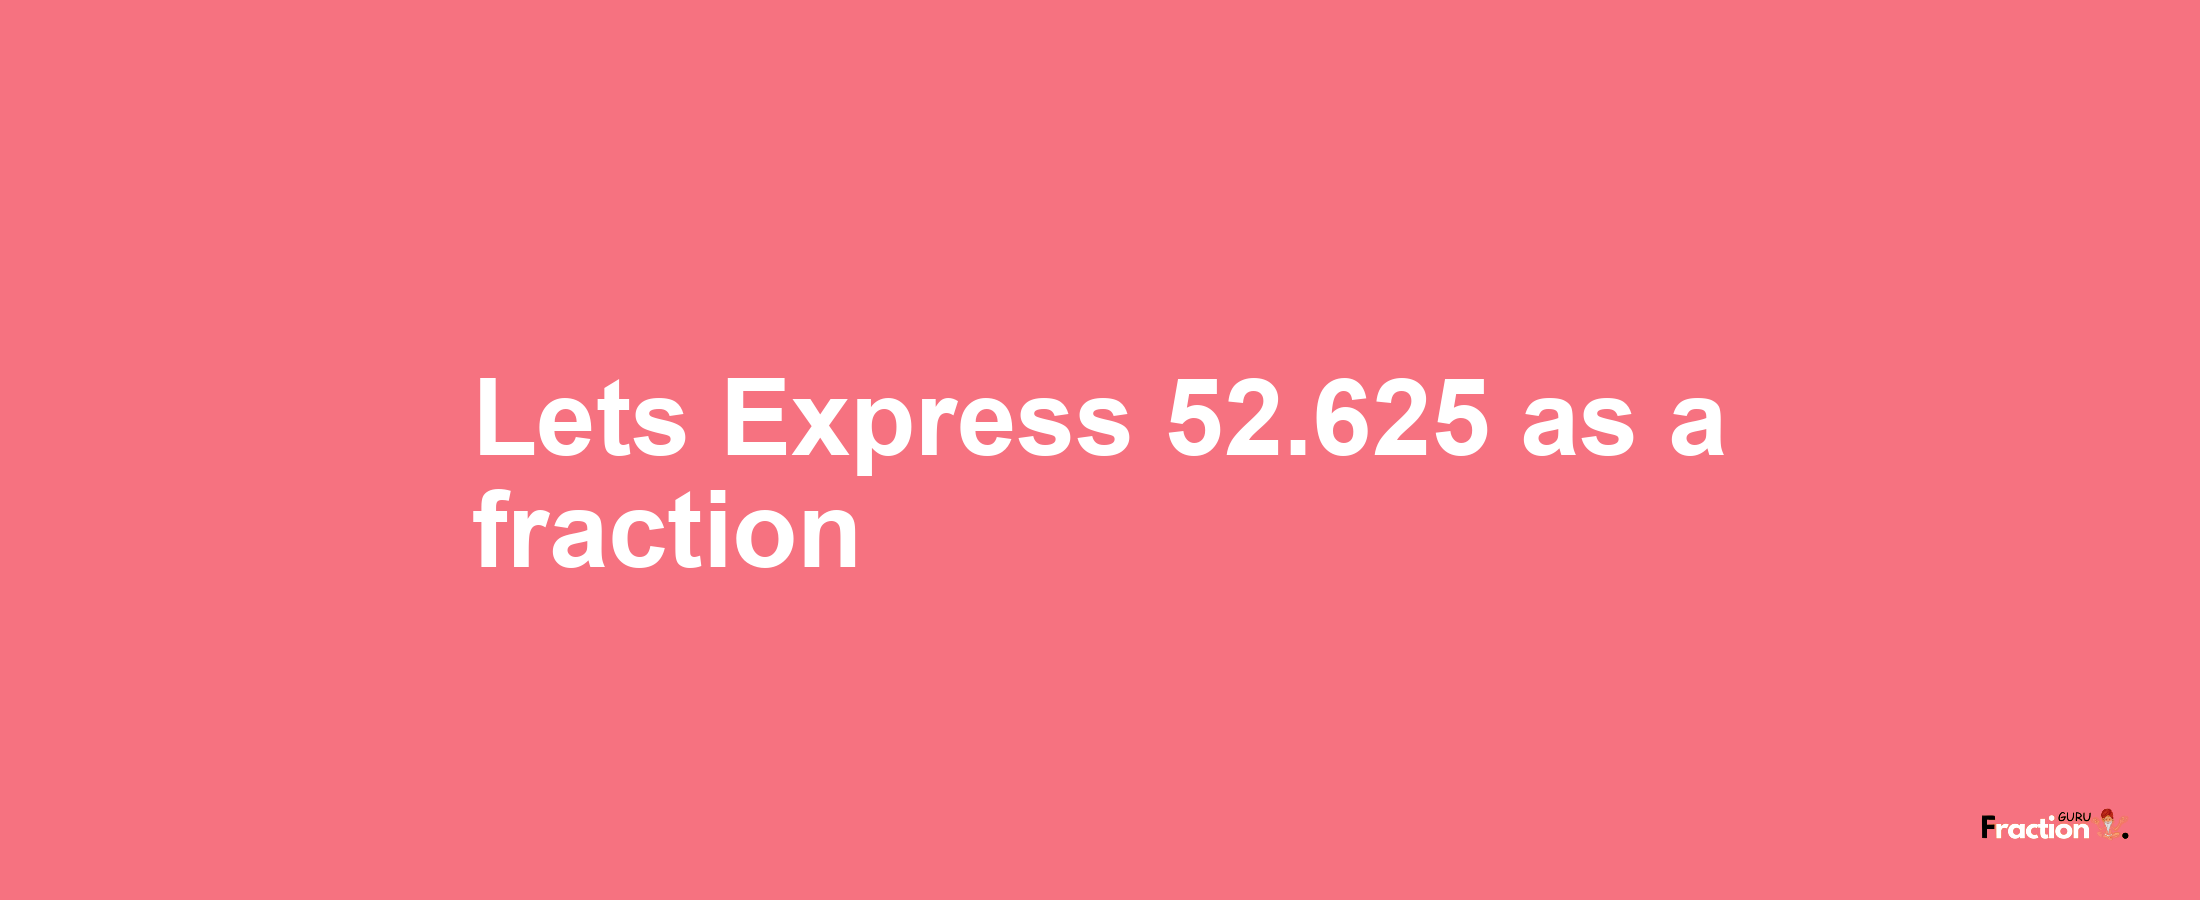 Lets Express 52.625 as afraction